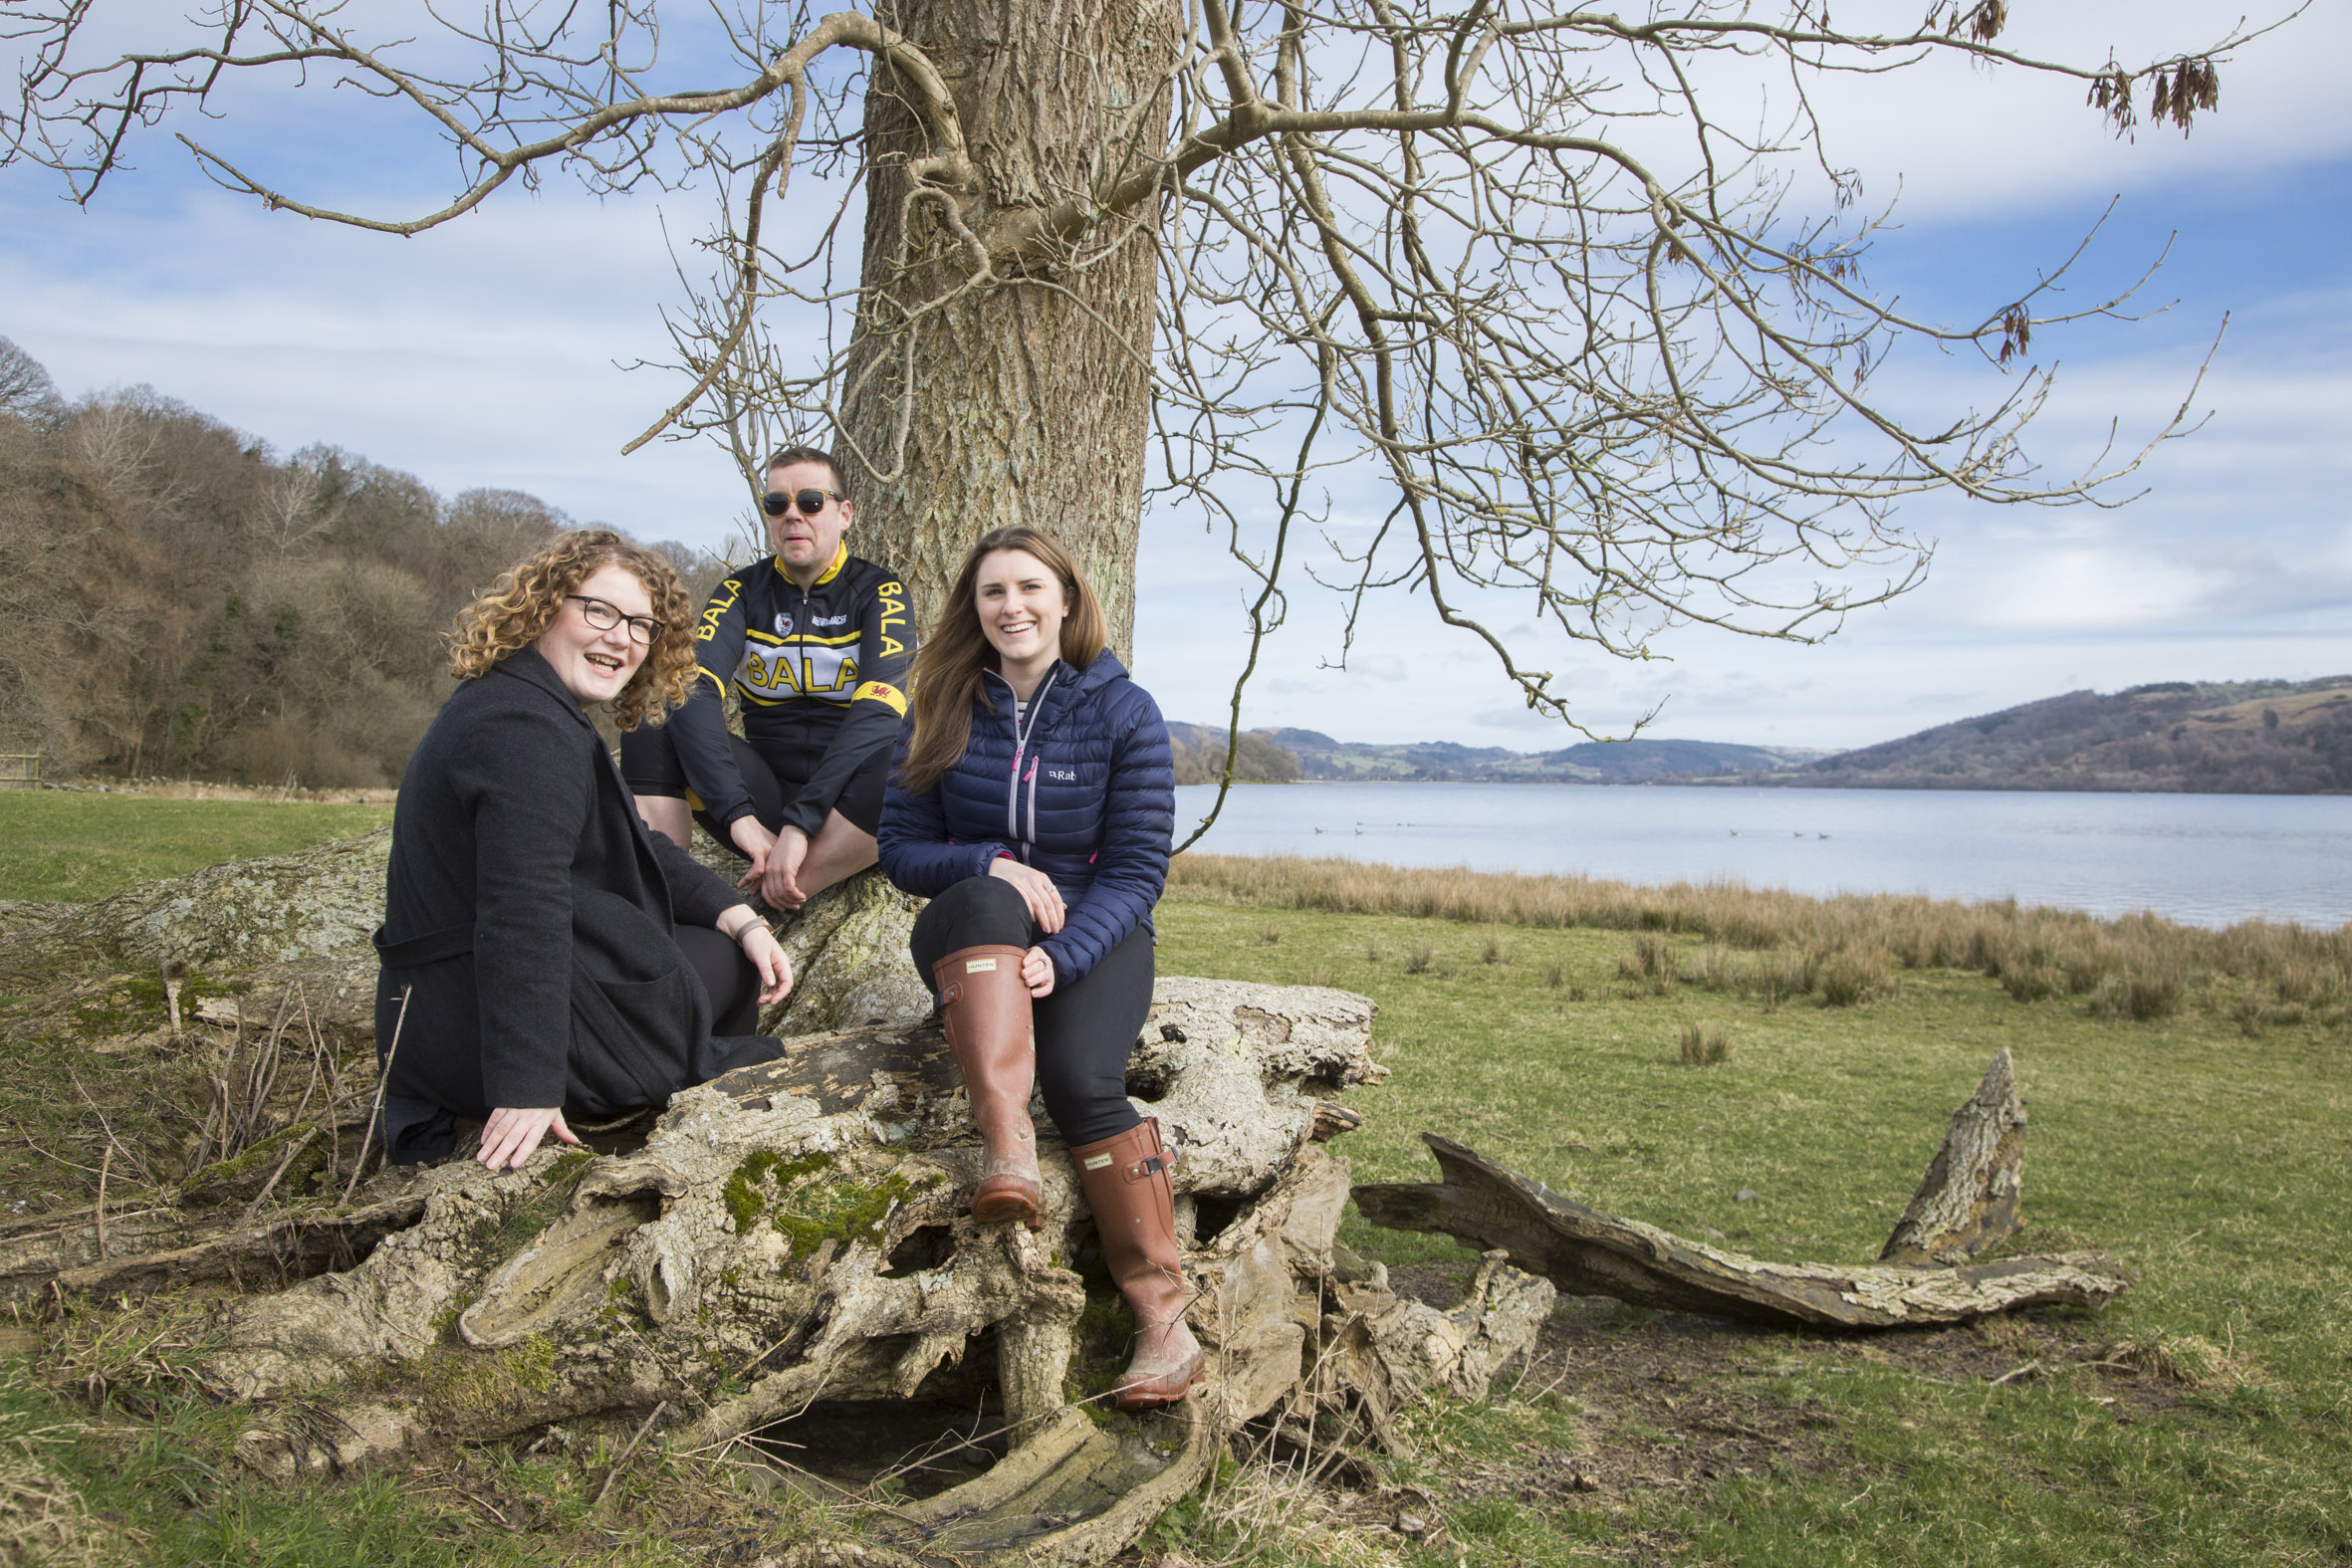 North Wales to stage major new outdoor adventure festival at Bala